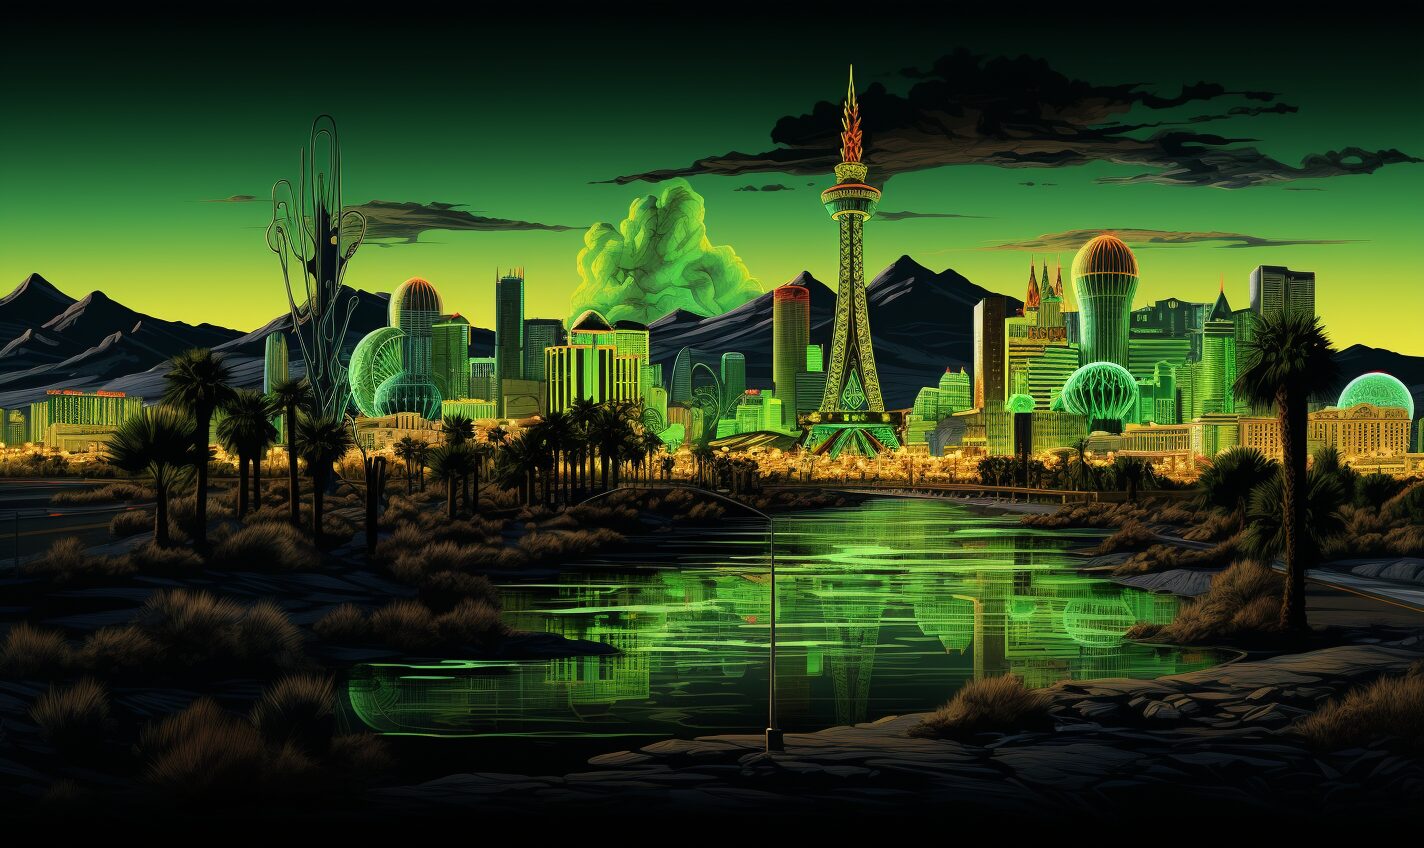 las vegas, nevada in a black and neon green glow